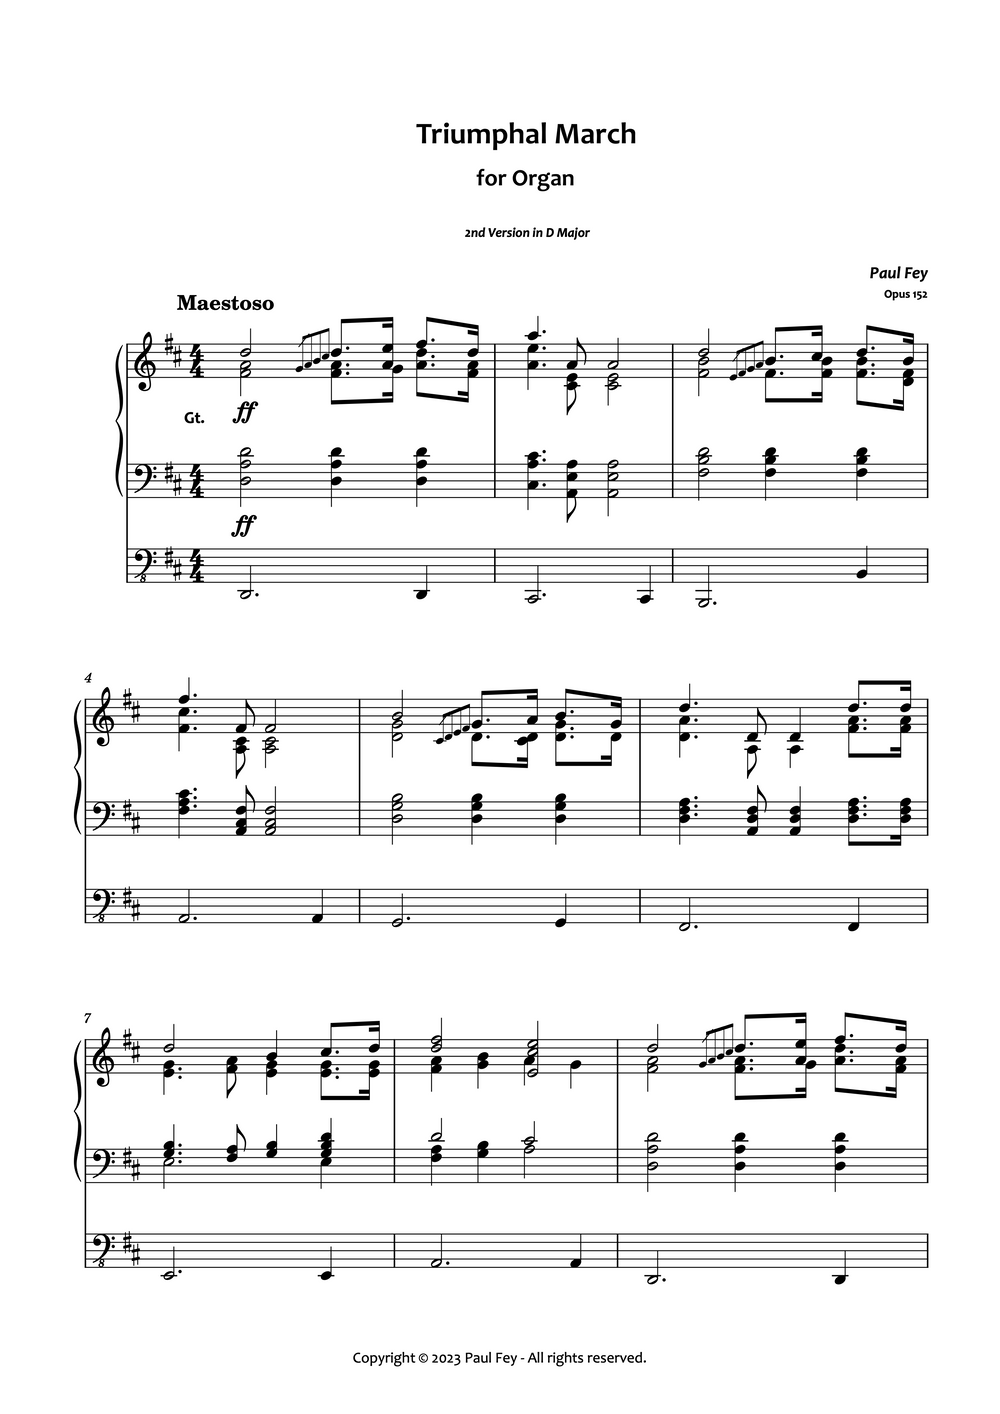 Triumphant March for Organ Pipe Organ Sheet Music by Paul Fey Organist and Pianist 